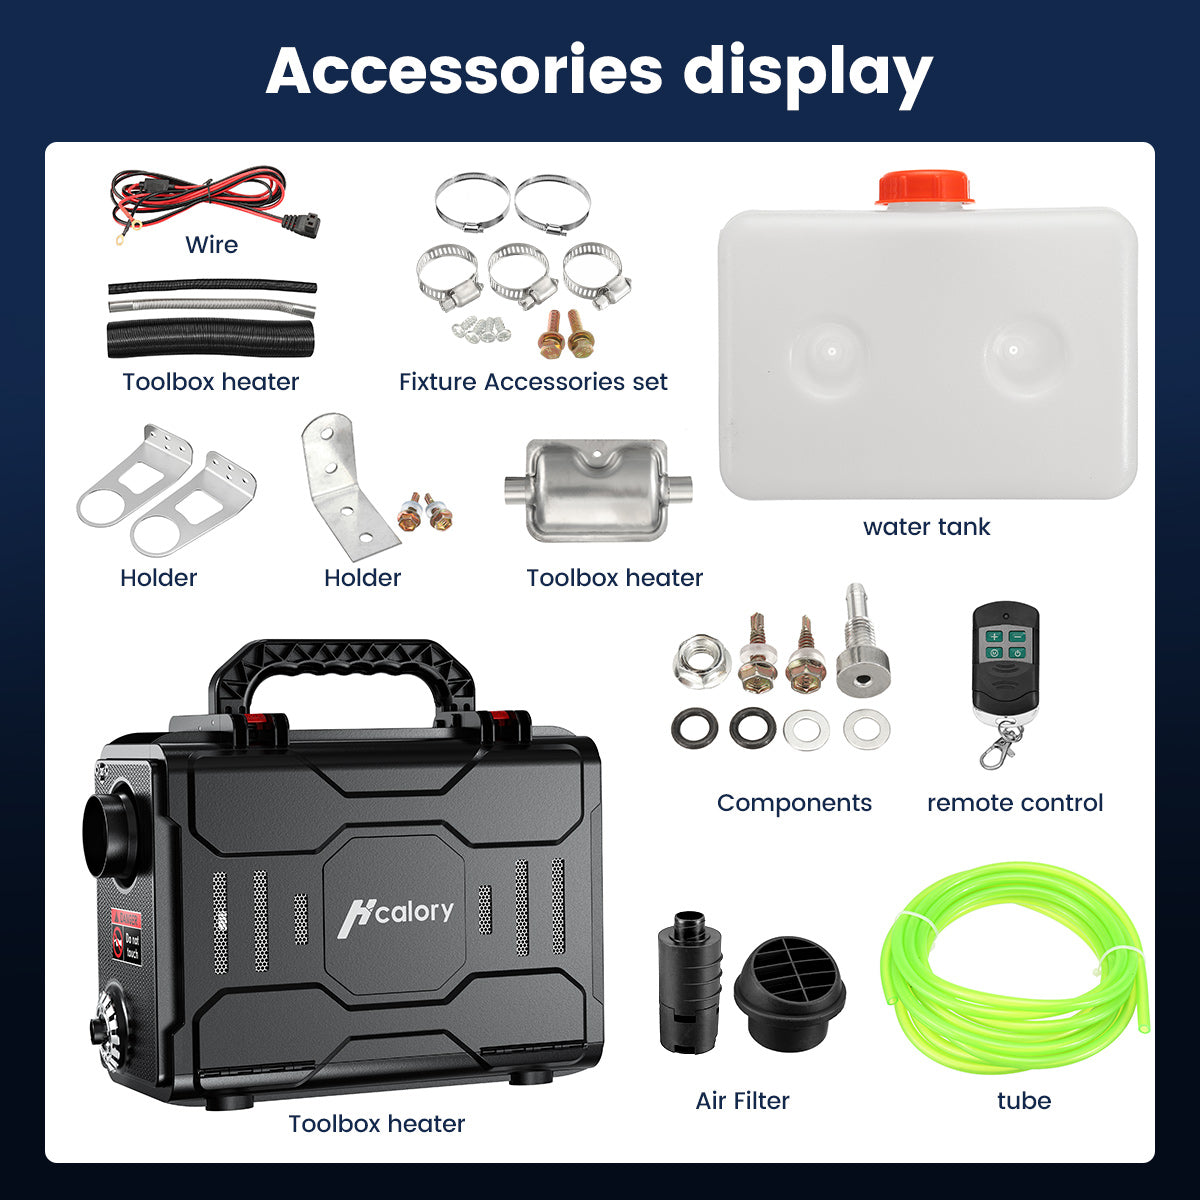 Hcalory-HC-A01-Diesel-Heater-5L-Handheld-Toolbox-All-In-One -back-Accessories-Display